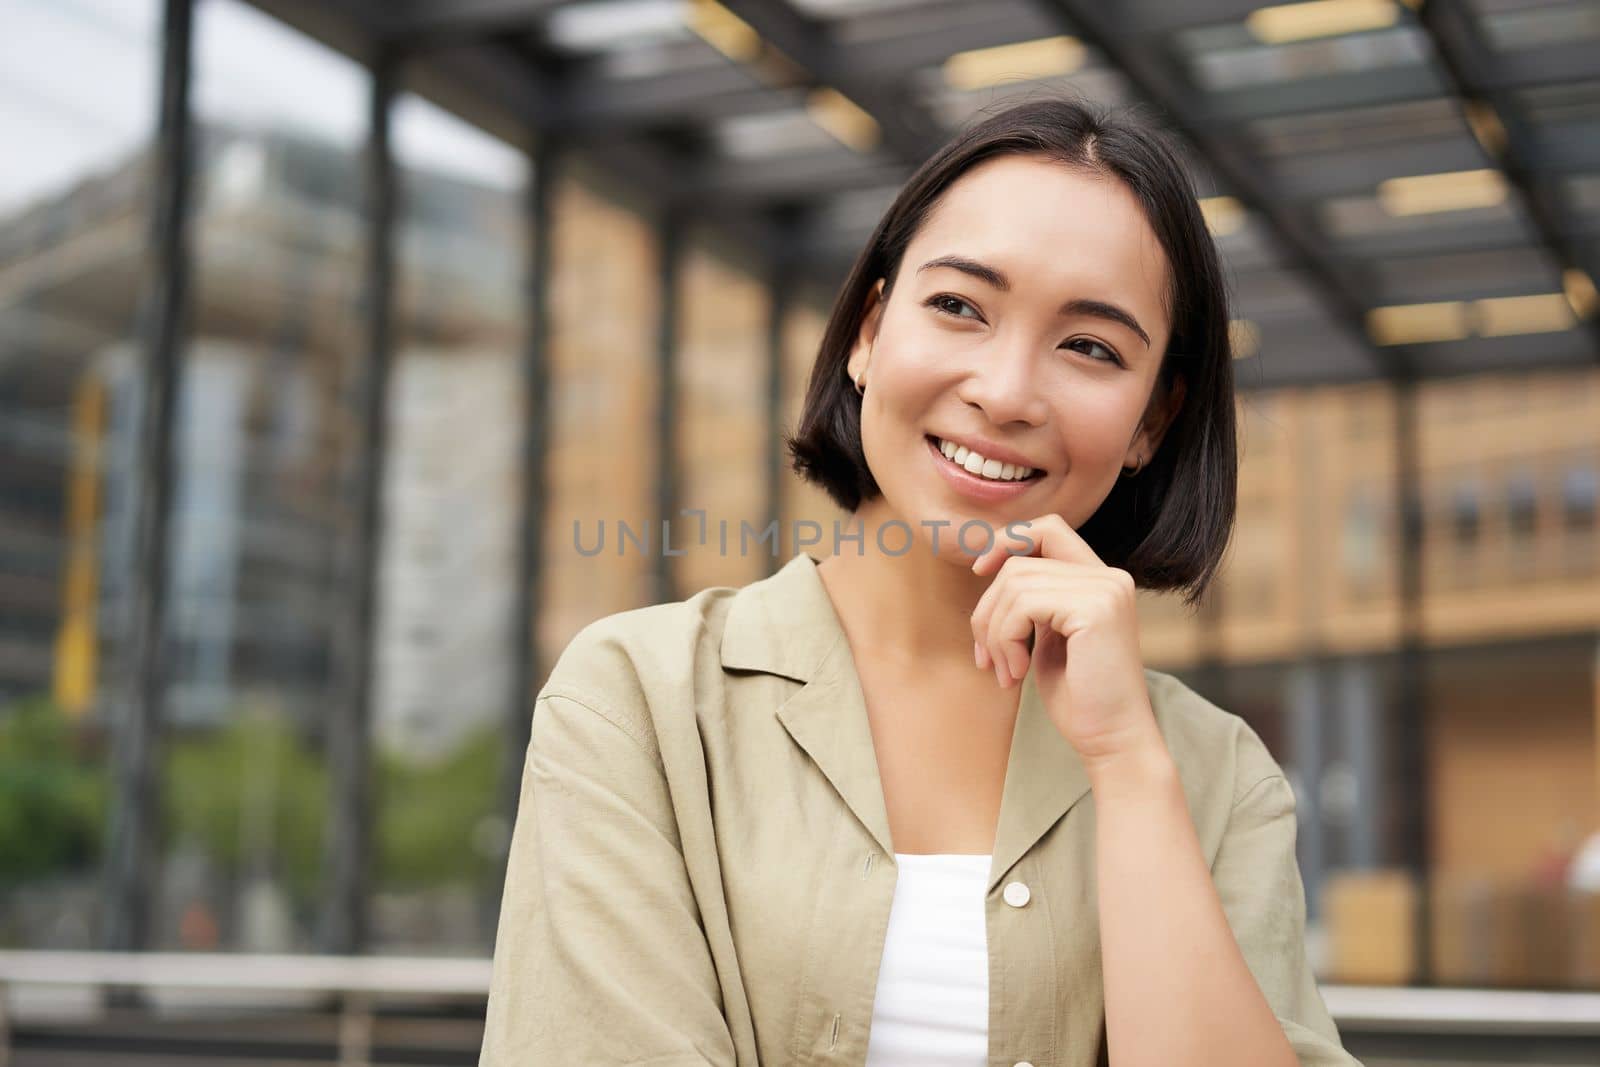 Portrait of beautiful young woman in casual clothes, smiling, posing outdoors on an empty street near glass building.